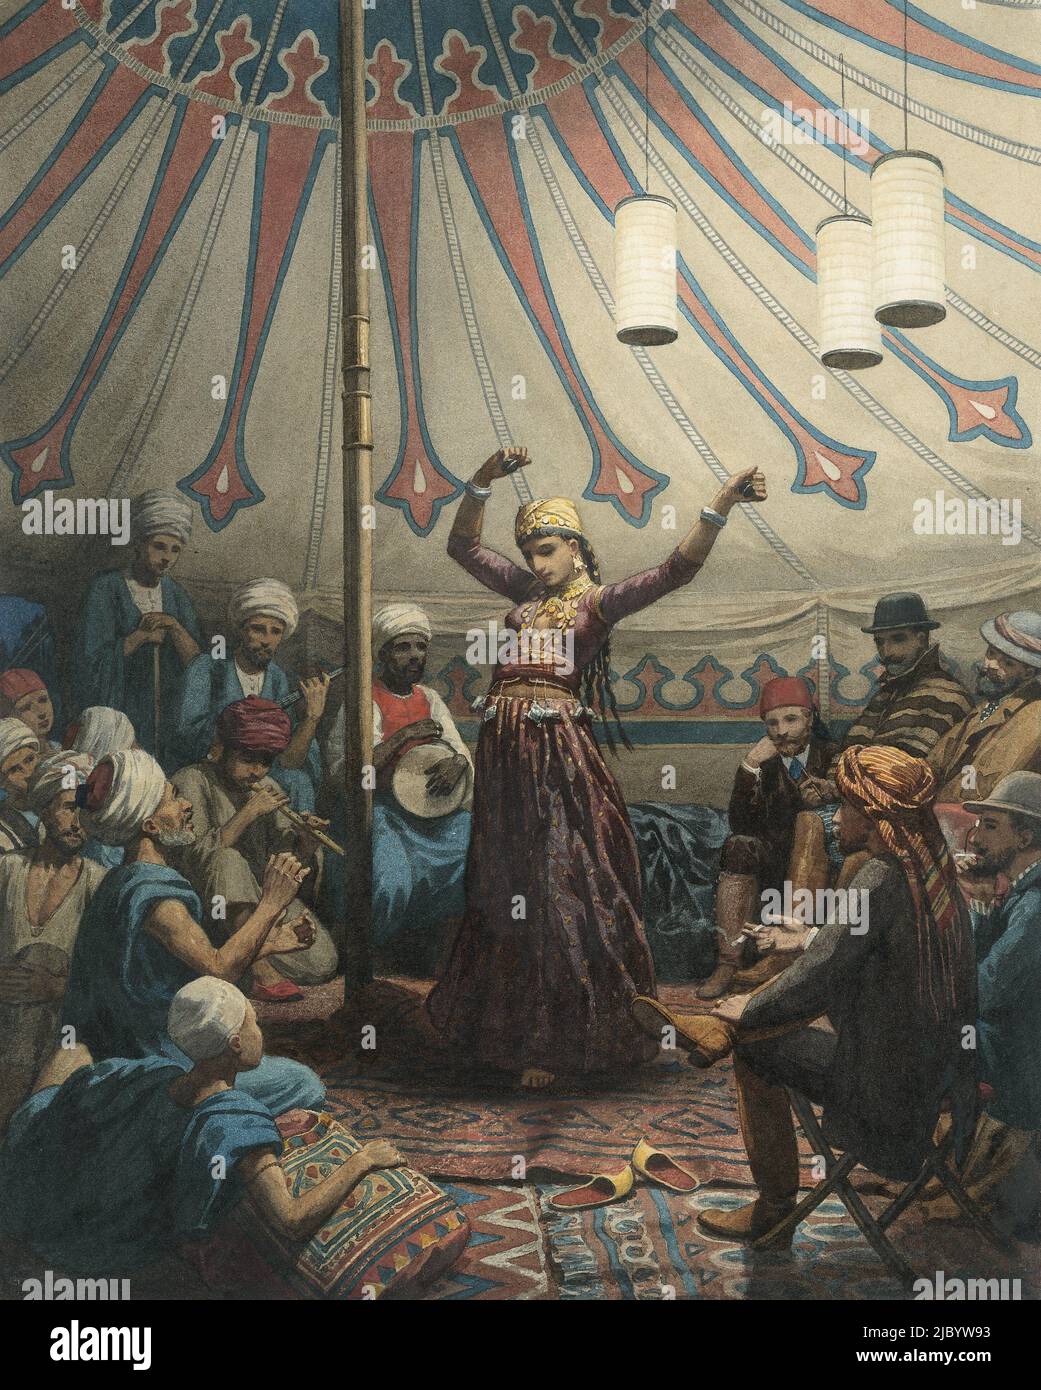 Egyptian dancer in a tent, with musicians and spectators, William de Famars Testas, in or after 1868, Danseuse Egyptienne (Raziëh)., draughtsman: Willem de Famars Testas, in or after 1868, paper, brush, h 323 mm × w 258 mm Stock Photo